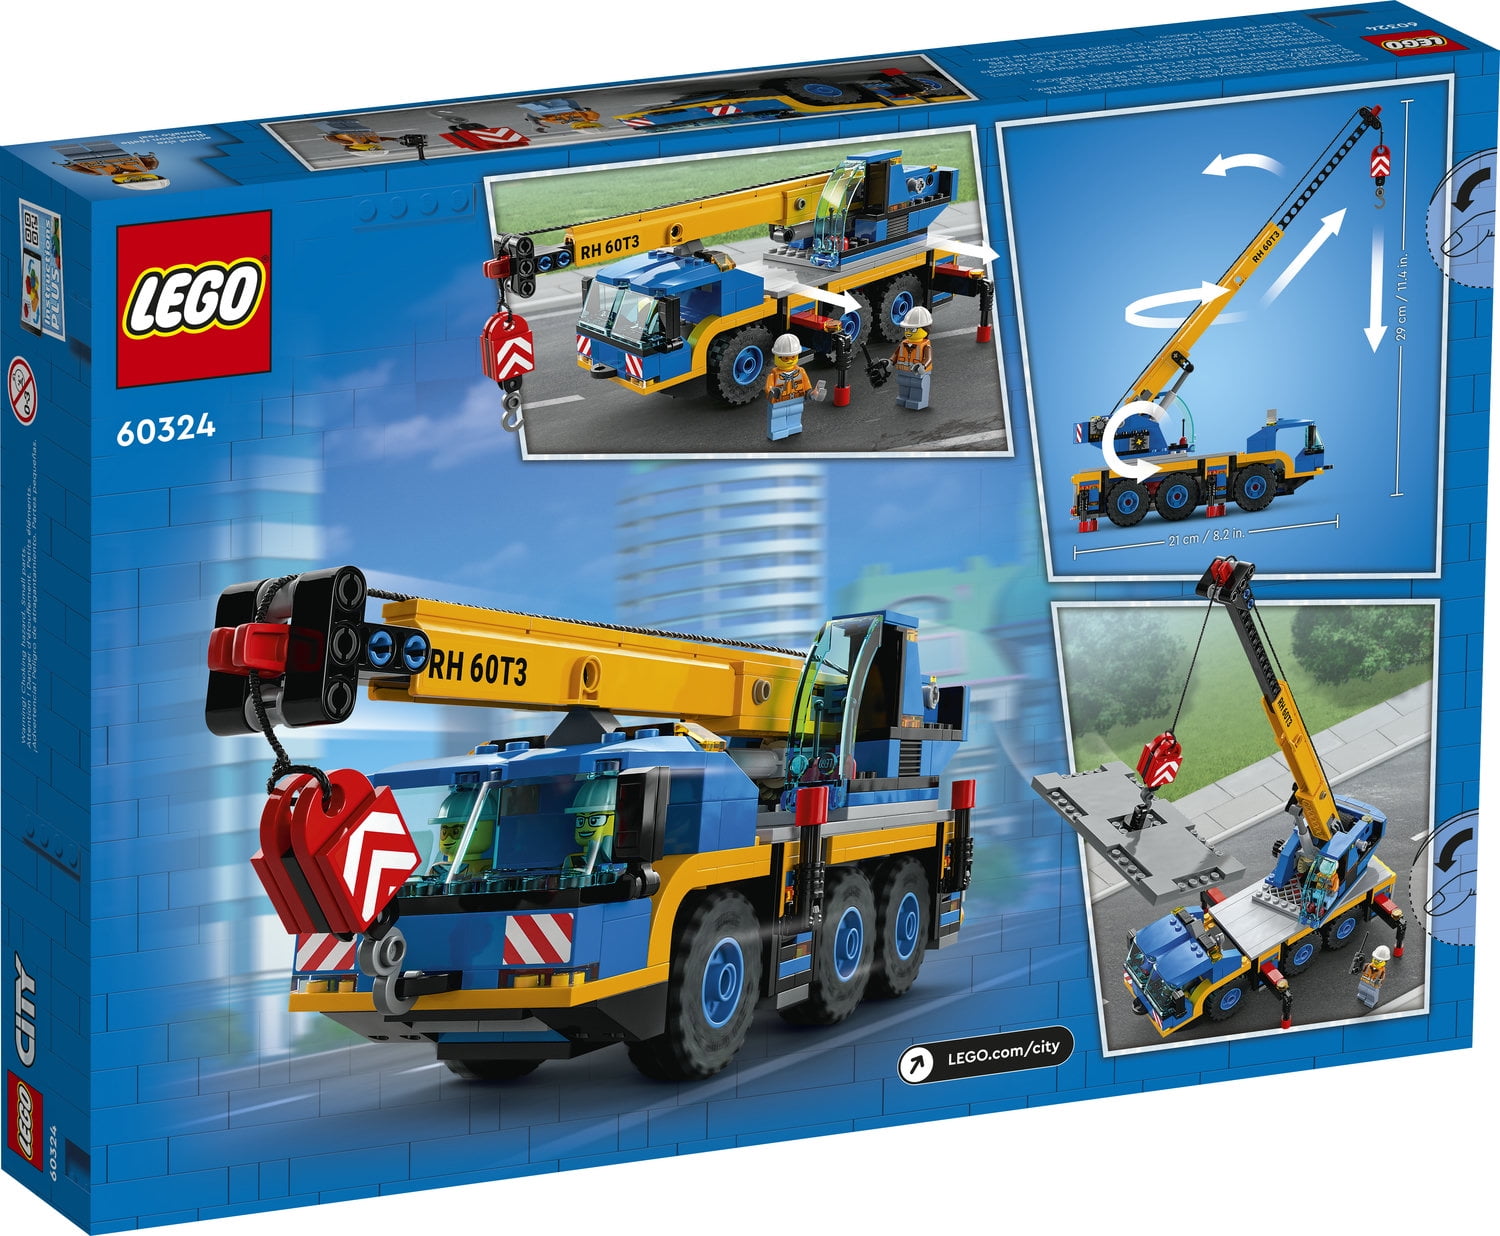 LEGO City Great Vehicles Mobile Crane Truck Toy Building Set 60324 -  Construction Vehicle Model, Featuring 2 Minifigures with Tool Toys Kit and  Road Plate, Playset for Boys and Girls Ages 7+ 